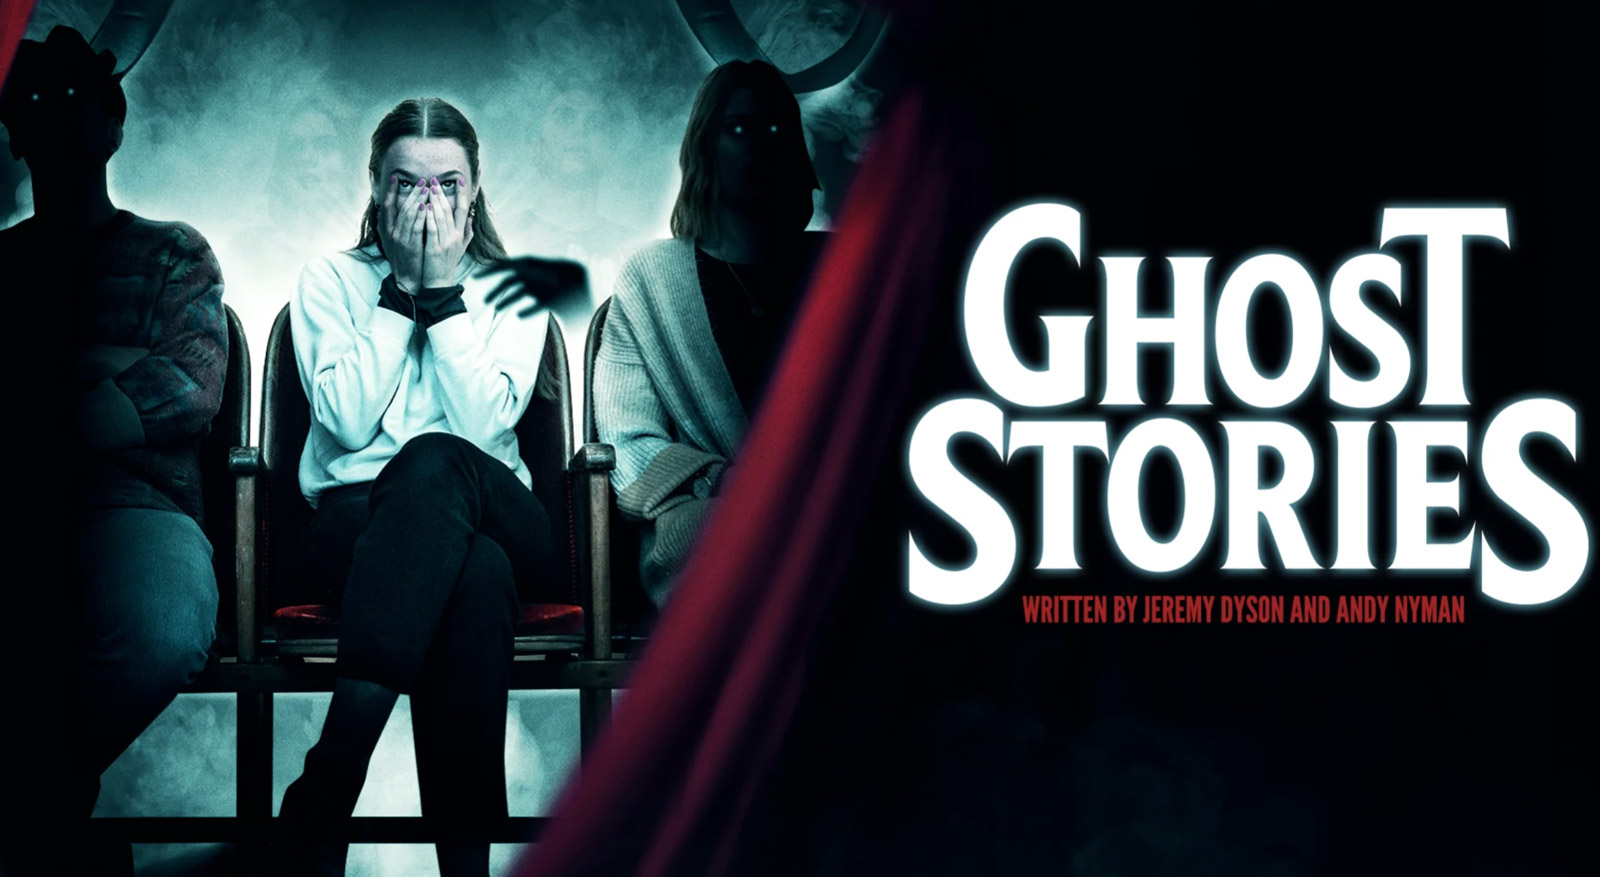 Ghost Stories UK Tour